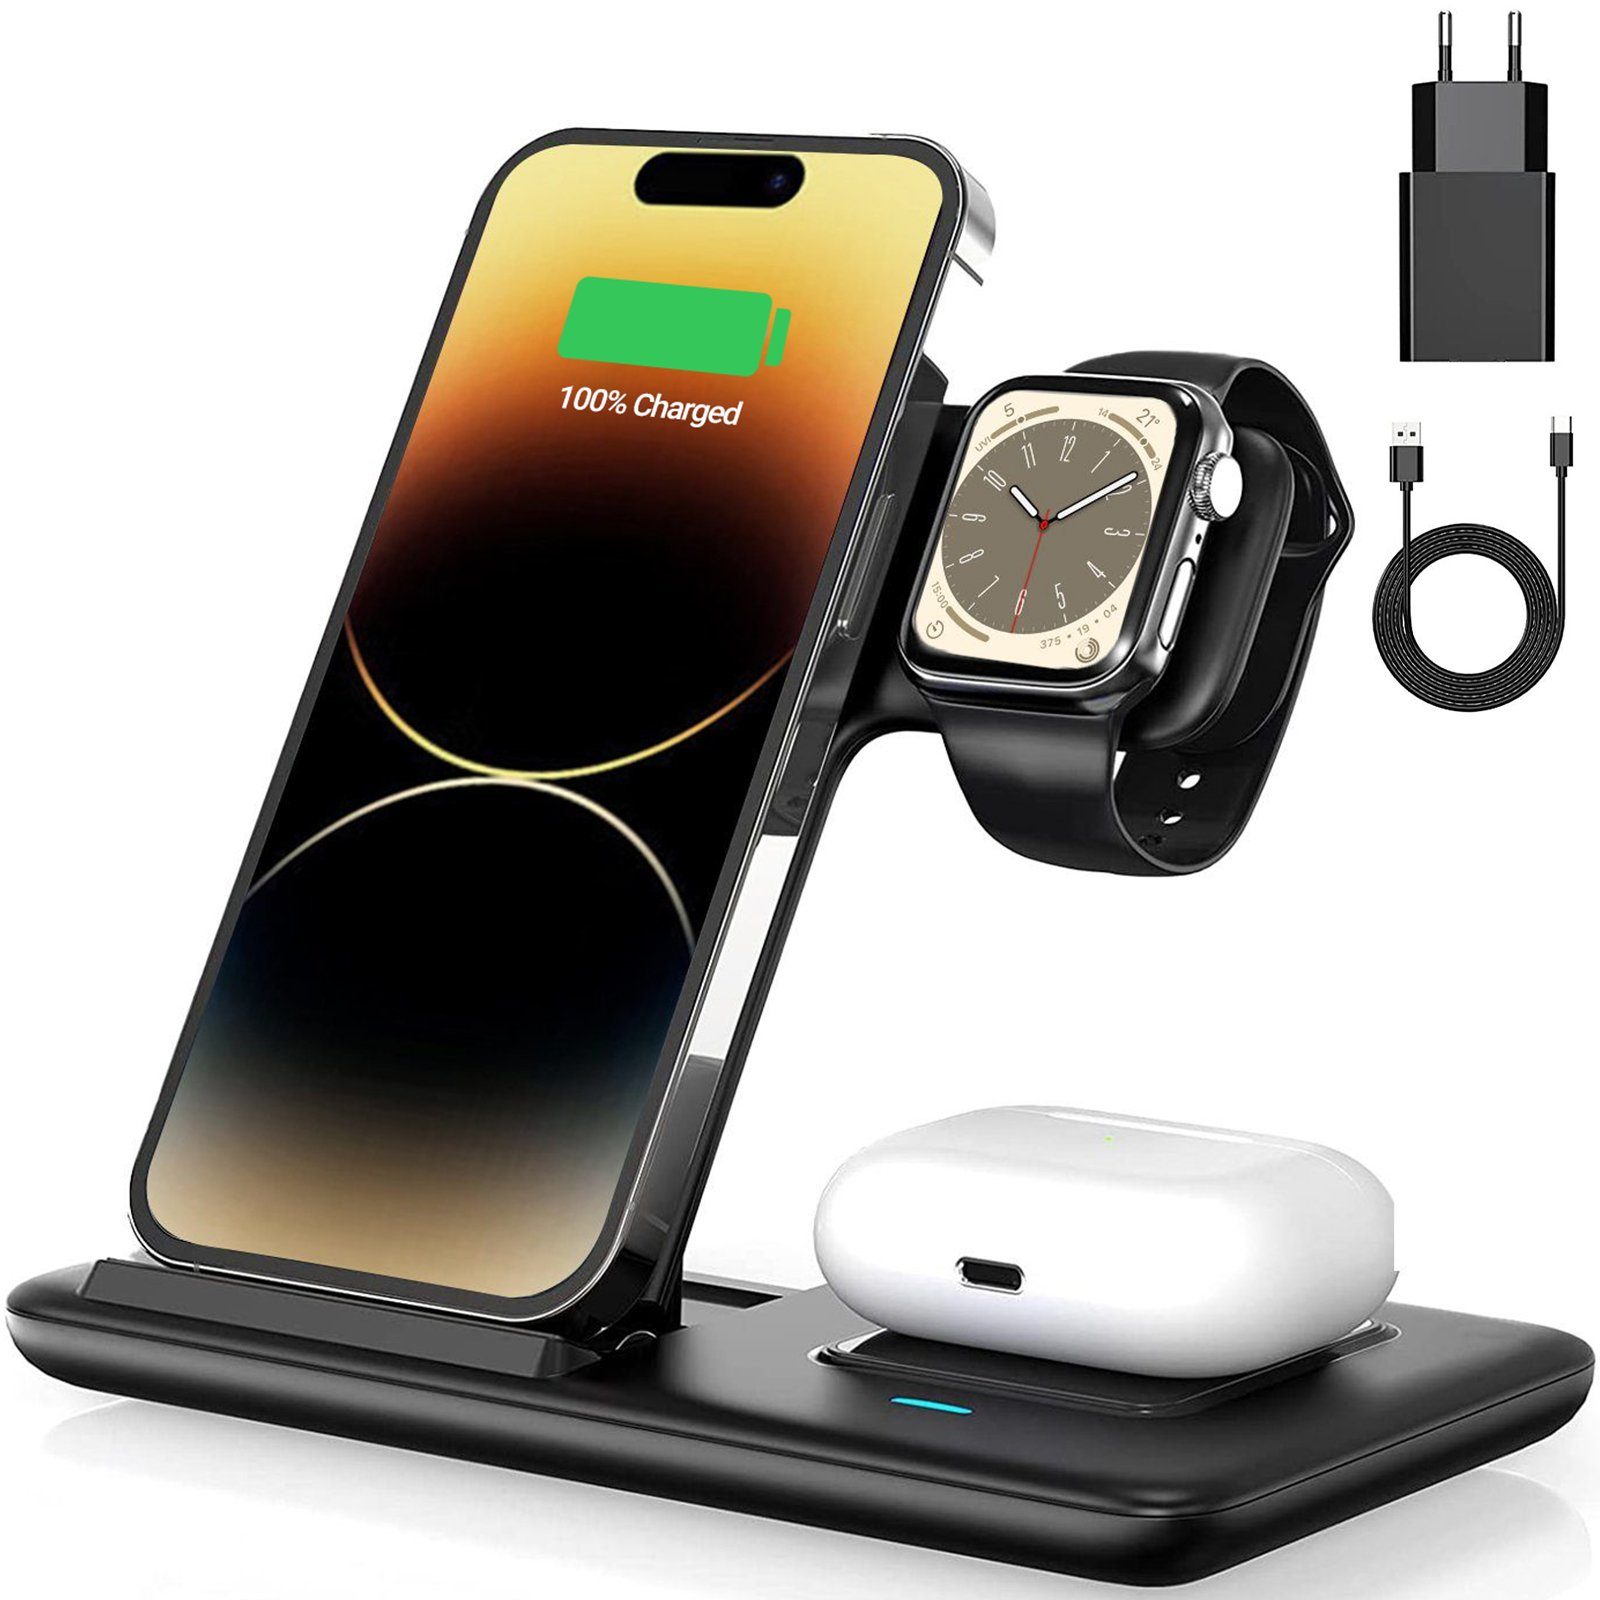 https://i.otto.de/i/otto/c0867fa3-b4cf-4d09-9ca9-ef6c81d103eb/joeais-ladestation-3-in-1-induktive-ladegeraet-kabellose-wireless-charger-induktions-ladegeraet-18w-mit-usb-c-kabel-fuer-iphone-14-13-12pro-mini-pro-max-apple-watch-iphone-airpods-handy-charging-station-induktive-ladegeraet-fuer-samsung-galaxy-xiaomi-note-galaxy-buds-airpods.jpg?$formatz$